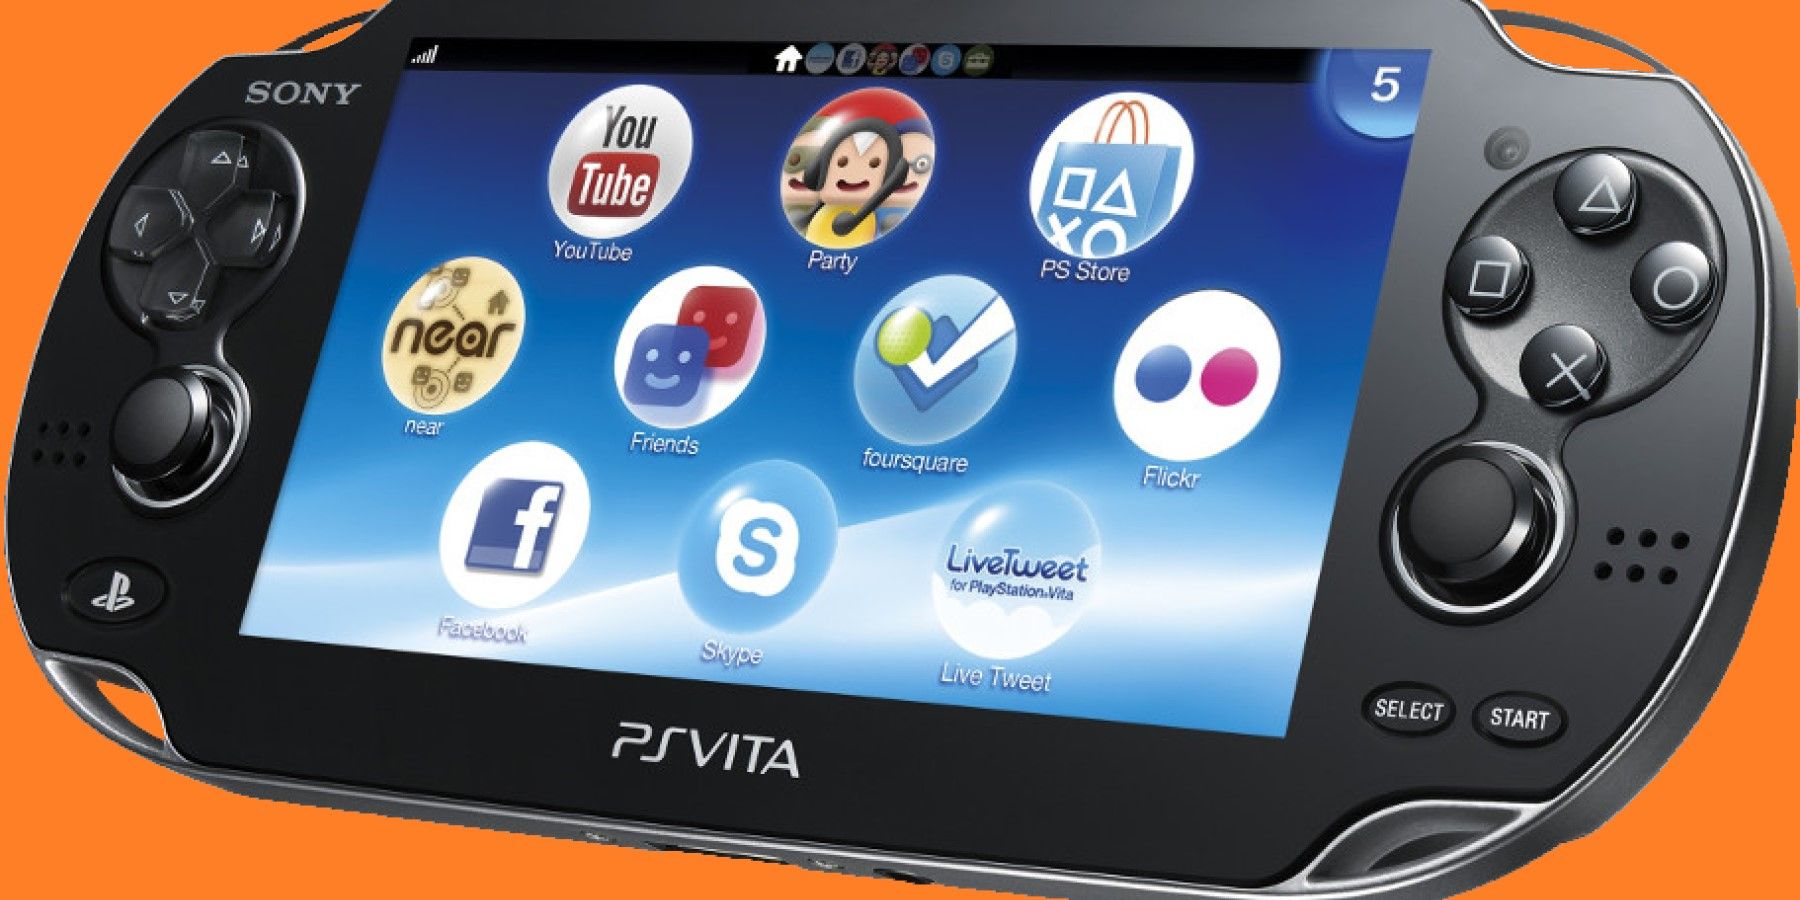 A NEW PLAYSTATION PORTABLE? - Don't F*** This Up Sony! - Electric